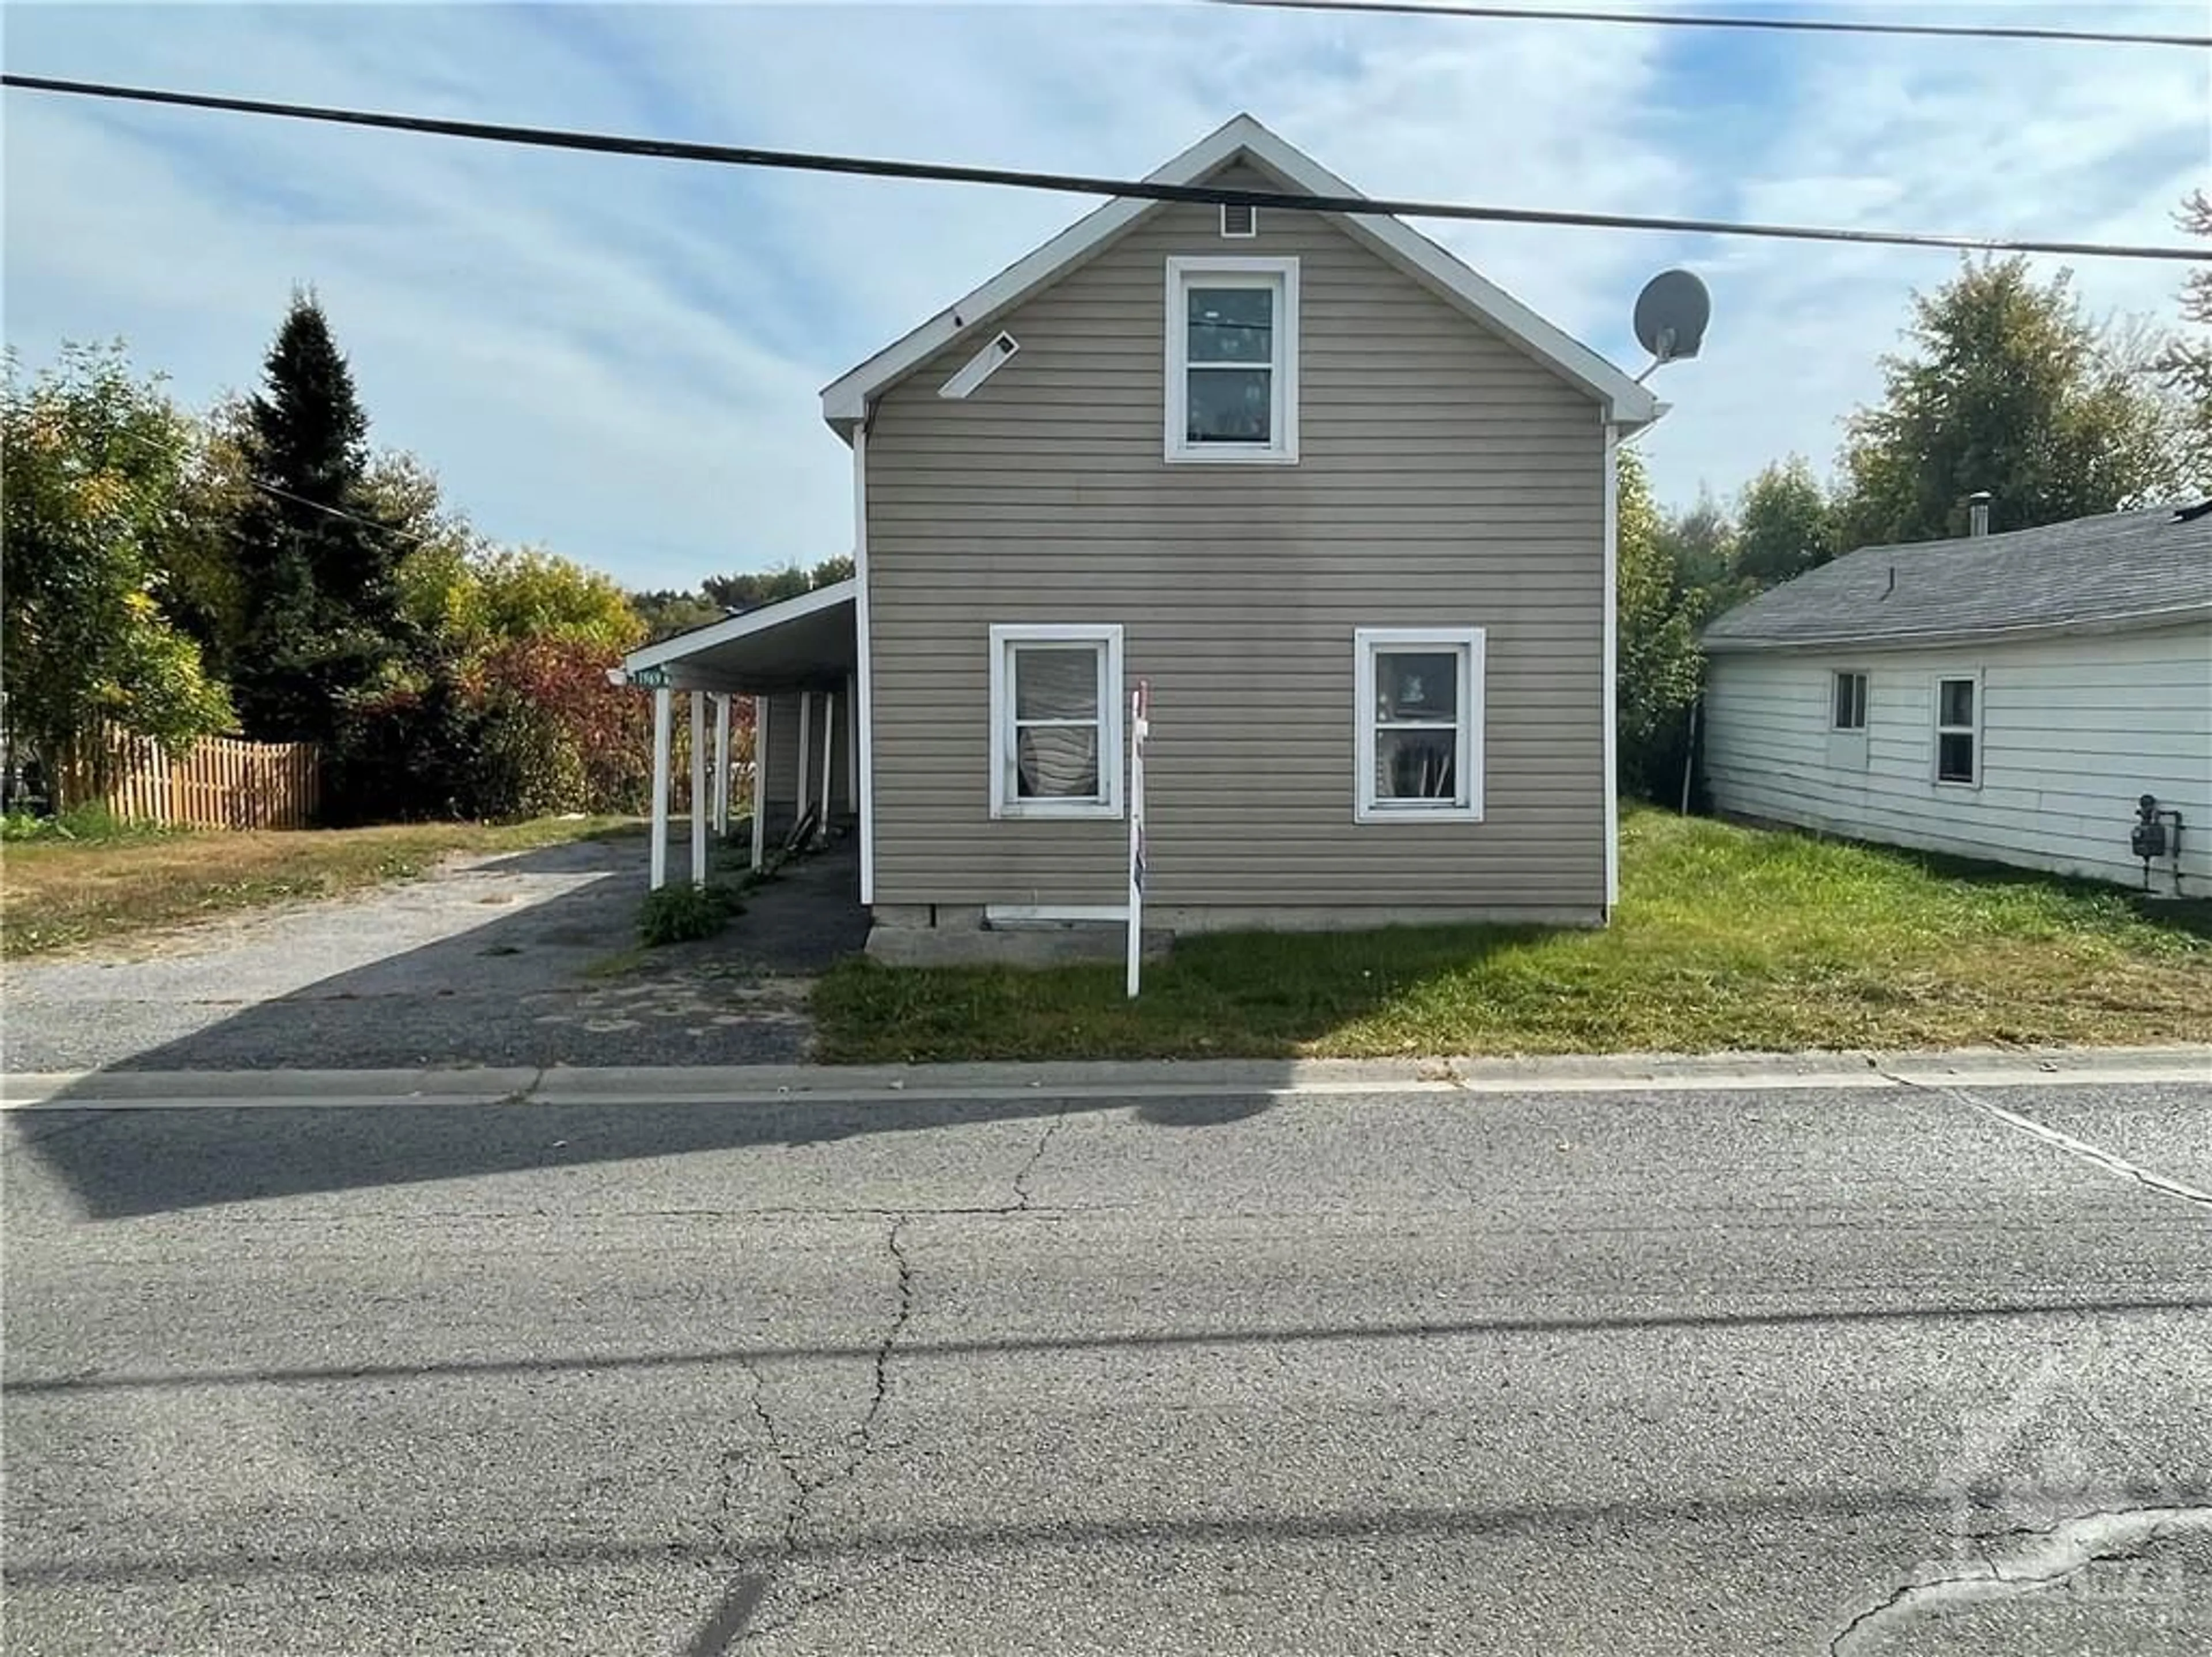 Outside view for 1969 CATHERINE St, Rockland Ontario K4K 1H6